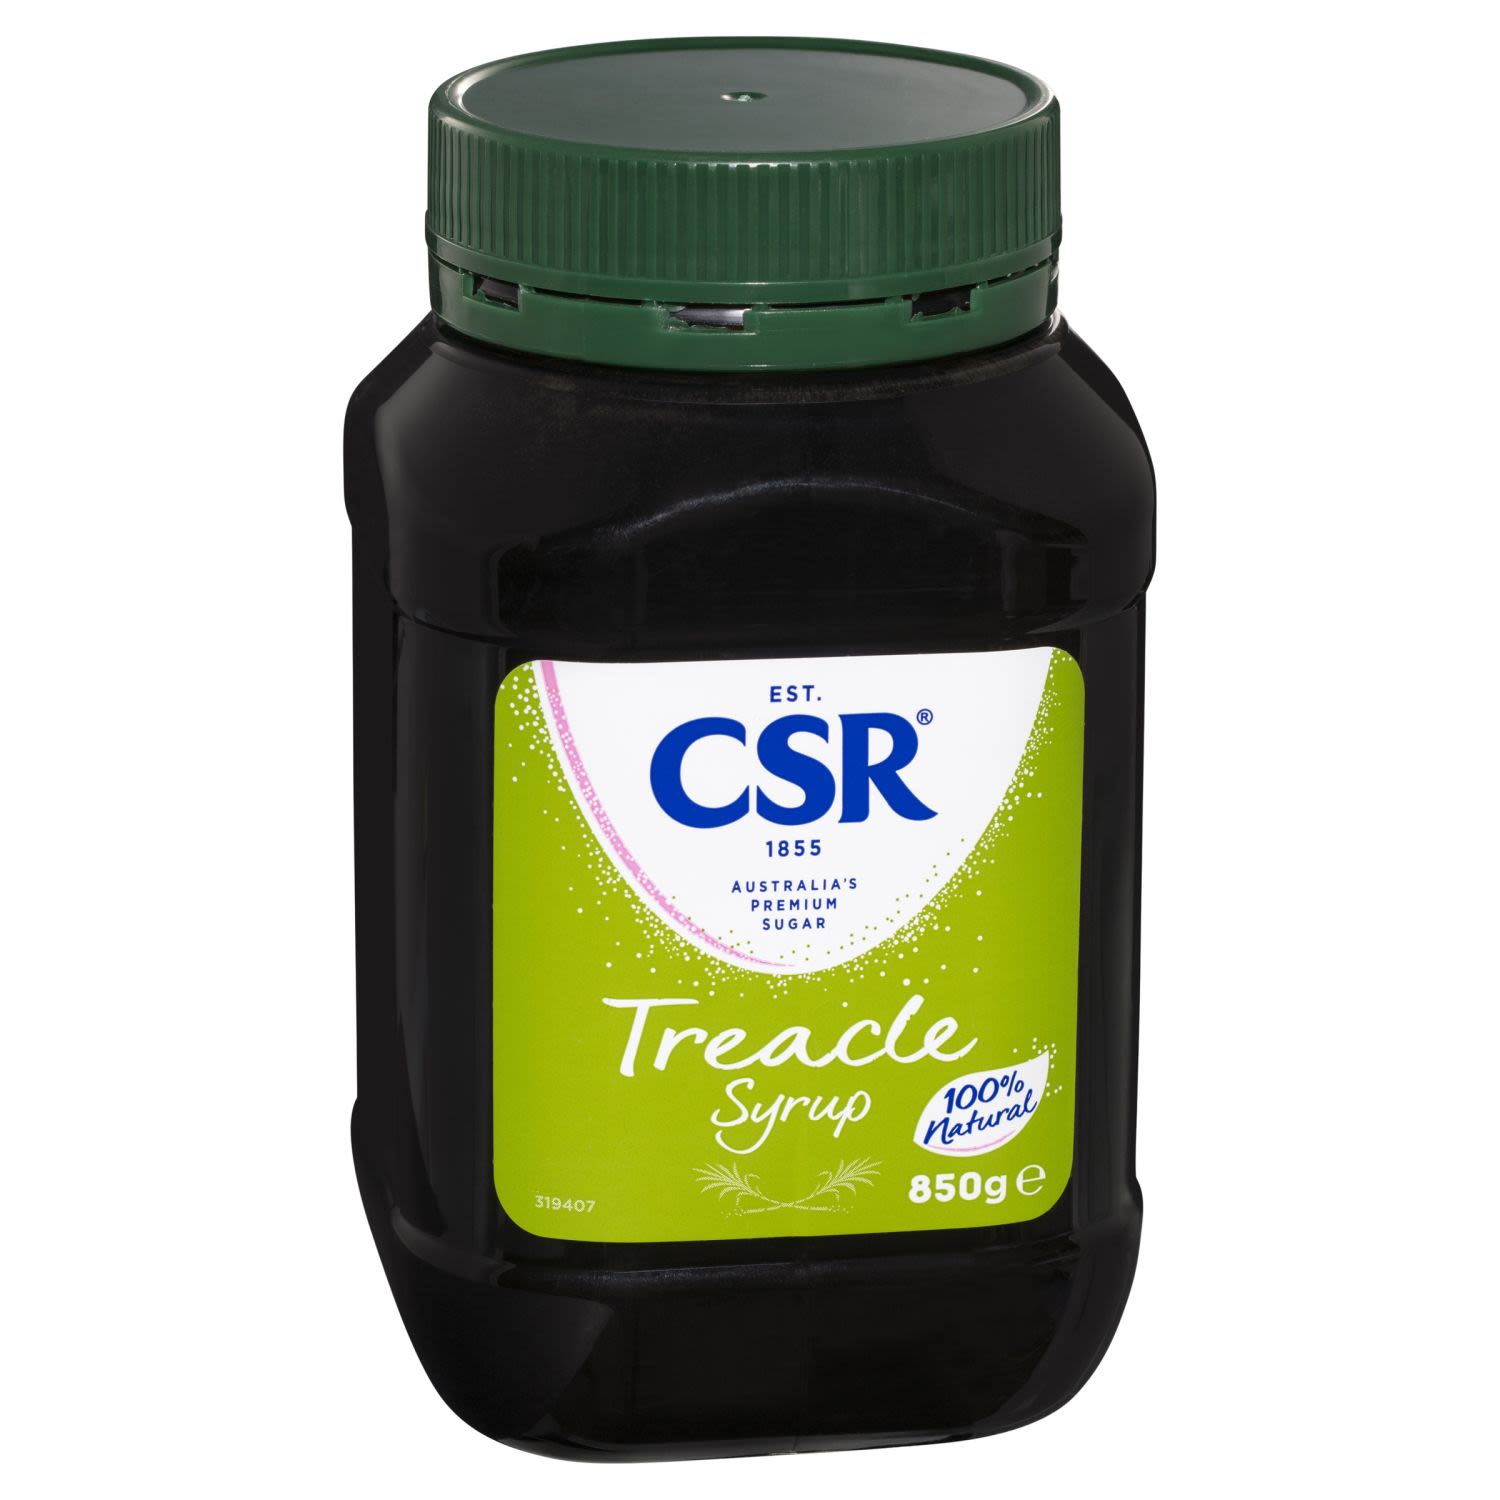 Add some sweetness to your baking with CSR Treacle Syrup. With a richer flavour and deeper colour than golden syrup, treacle has the highest molasses content among all CSR Sugars. This gives it an intense colour, distinctive liquorice flavour and mild smoky aroma that is excellent in baked goods, sauces and puddings.<br /> <br />